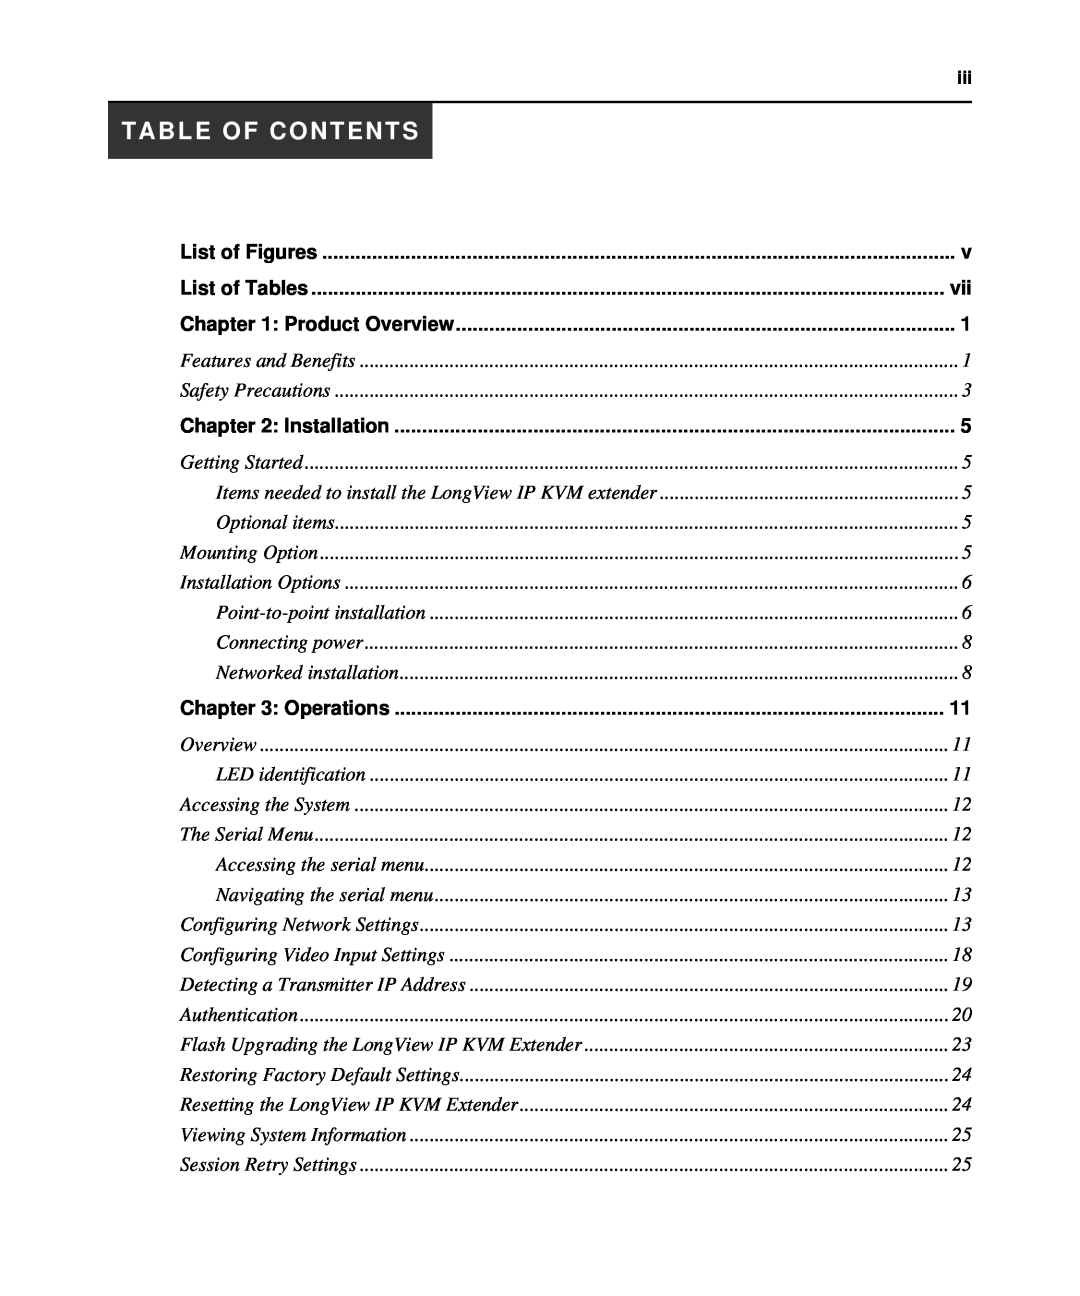 Avocent LongView IP manual Table Of Contents, Features and Benefits, Safety Precautions, Getting Started, Optional items 